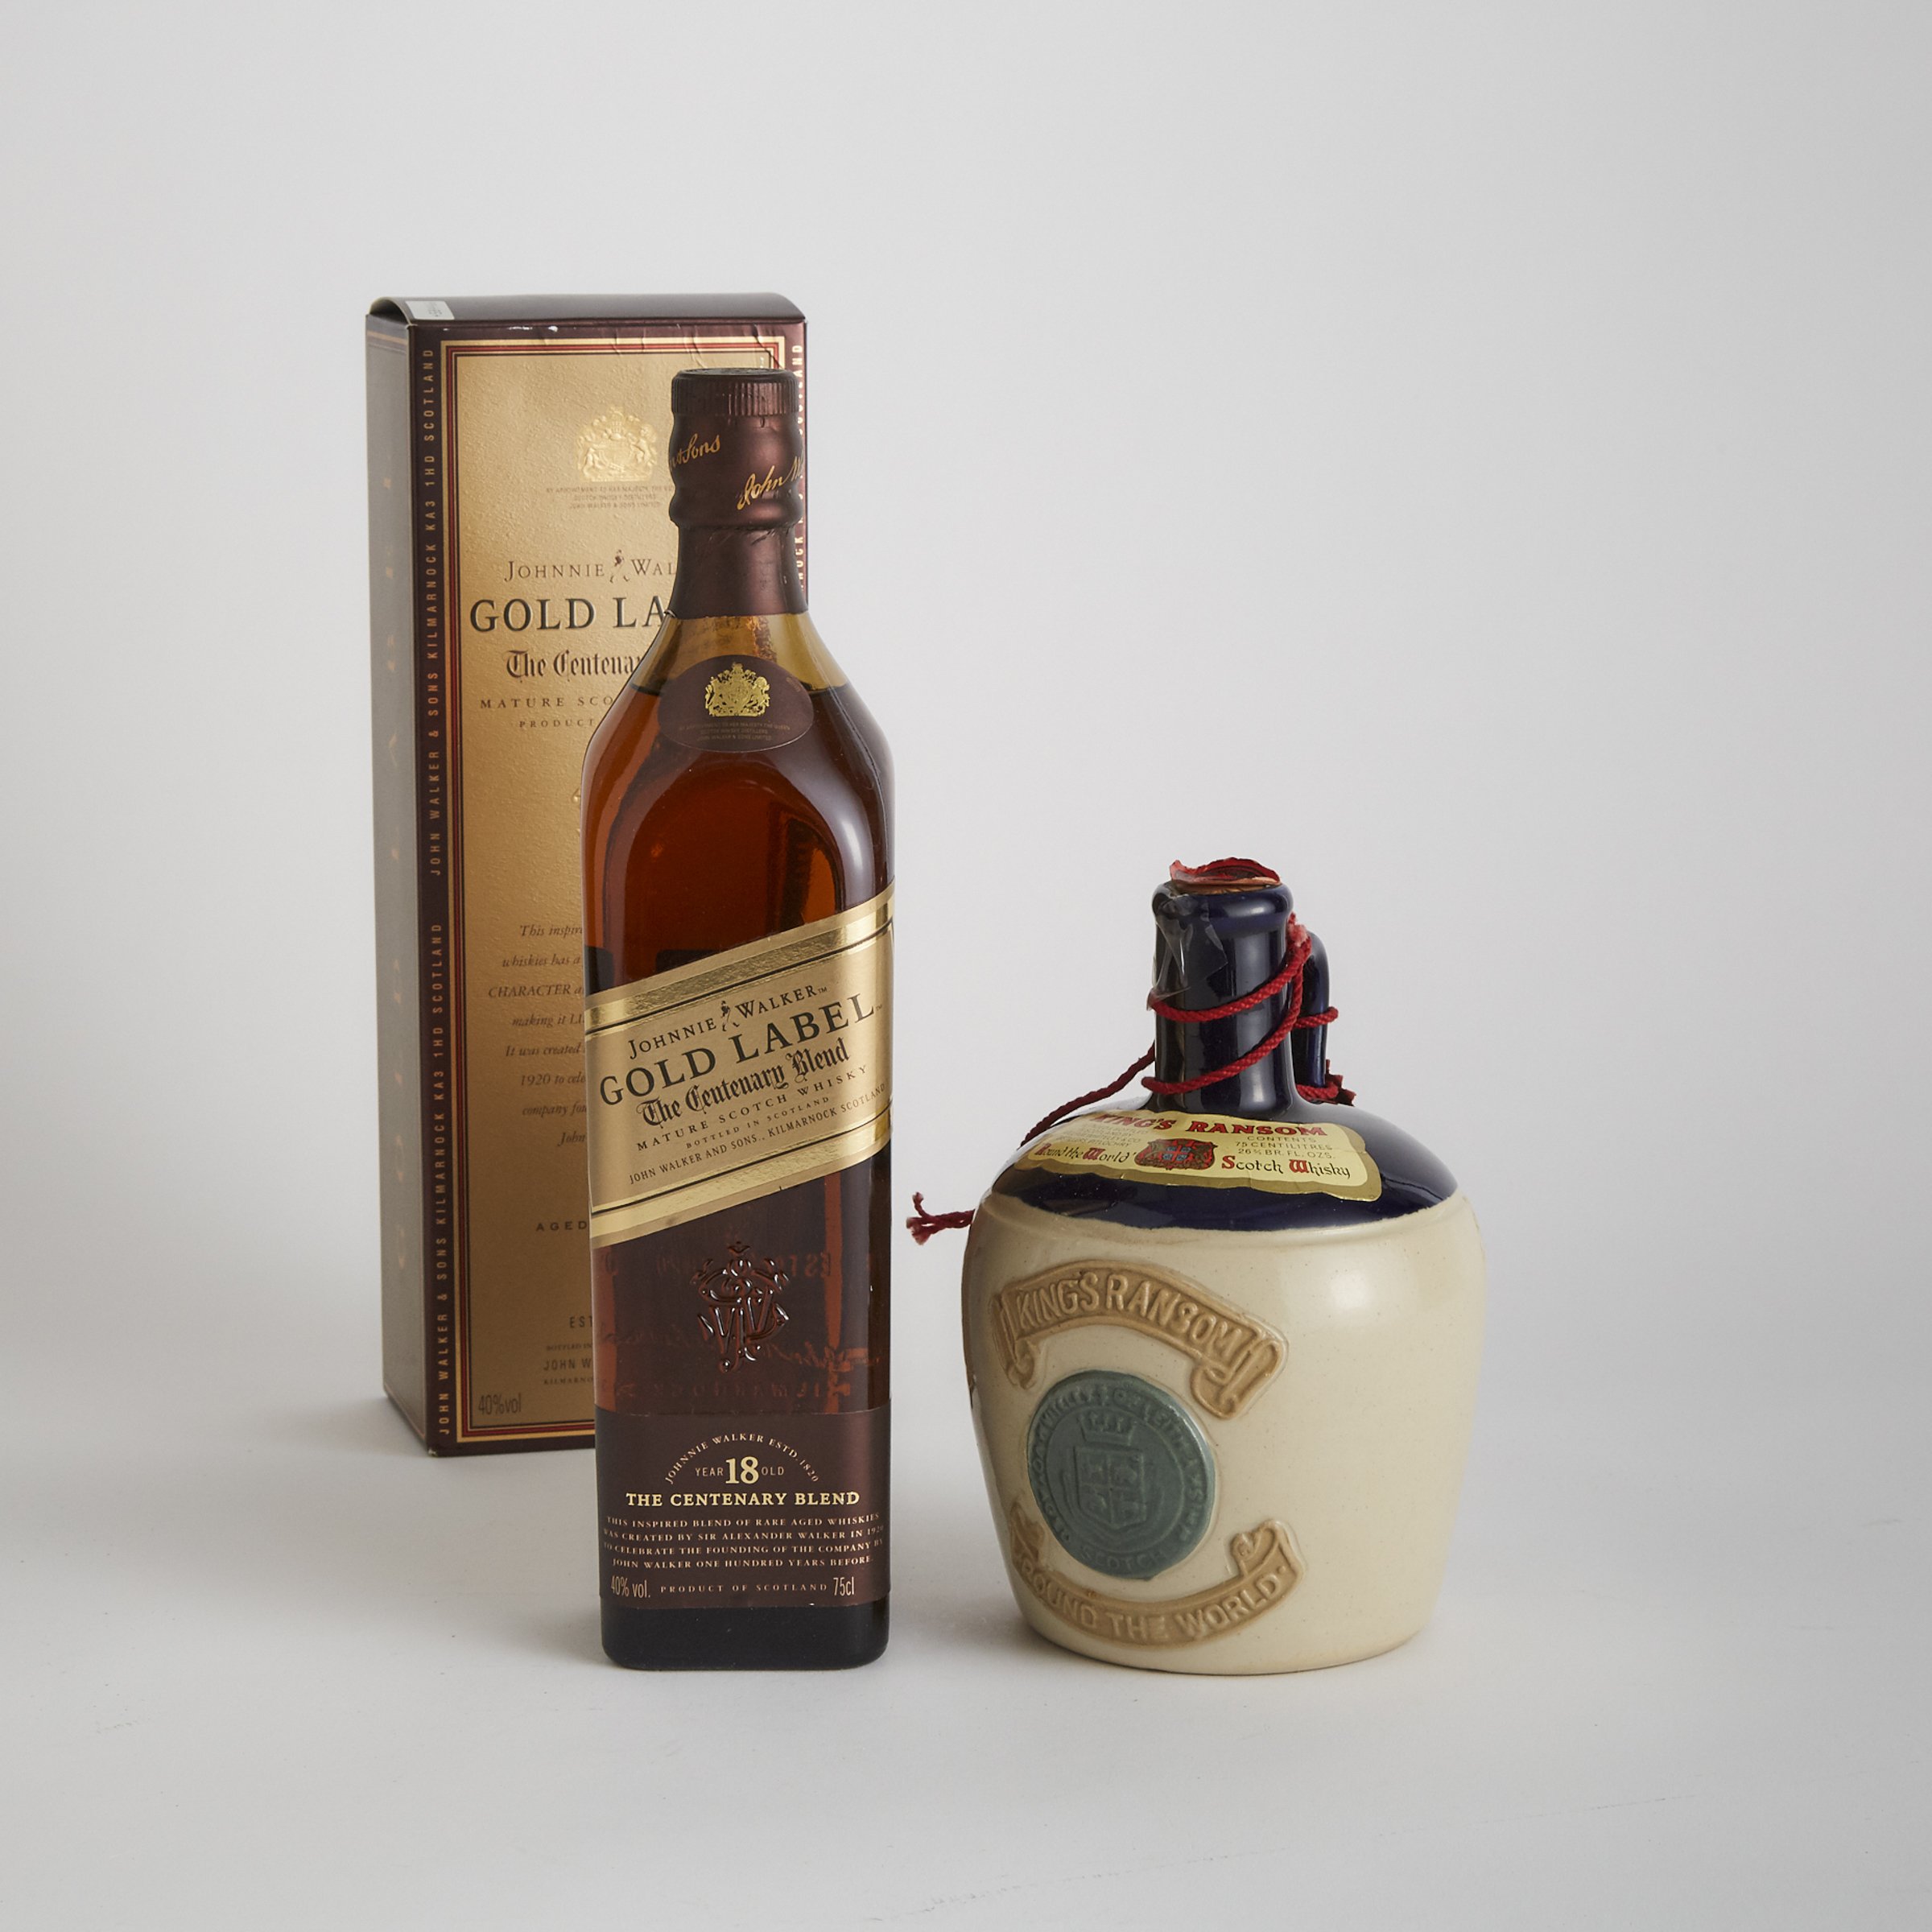 JOHNNY WALKER GOLD LABEL BLENDED SCOTCH WHISKY 18 YEARS (ONE 75 CL)
KING'S RANSOM BLENDED SCOTCH WHISKEY 12 YEARS (ONE 75 CL)